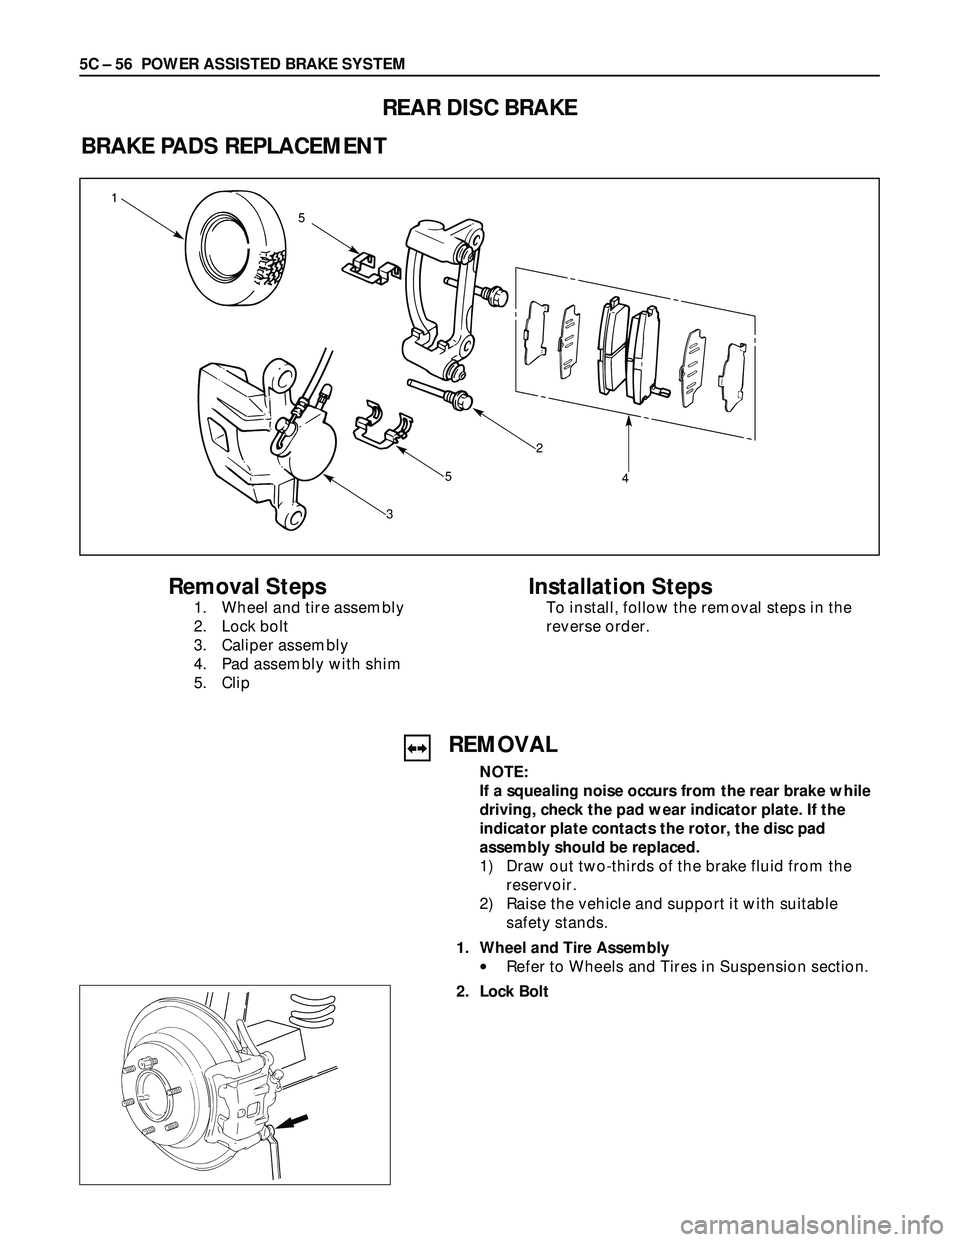 ISUZU TROOPER 1998  Service Service Manual 5C – 56 POWER ASSISTED BRAKE SYSTEM
REAR DISC BRAKE
BRAKE PADS REPLACEMENT
1
5
5
3
2
4
Removal Steps
1. Wheel and tire assembly
2. Lock bolt
3. Caliper assembly
4. Pad assembly with shim
5. Clip
Ins